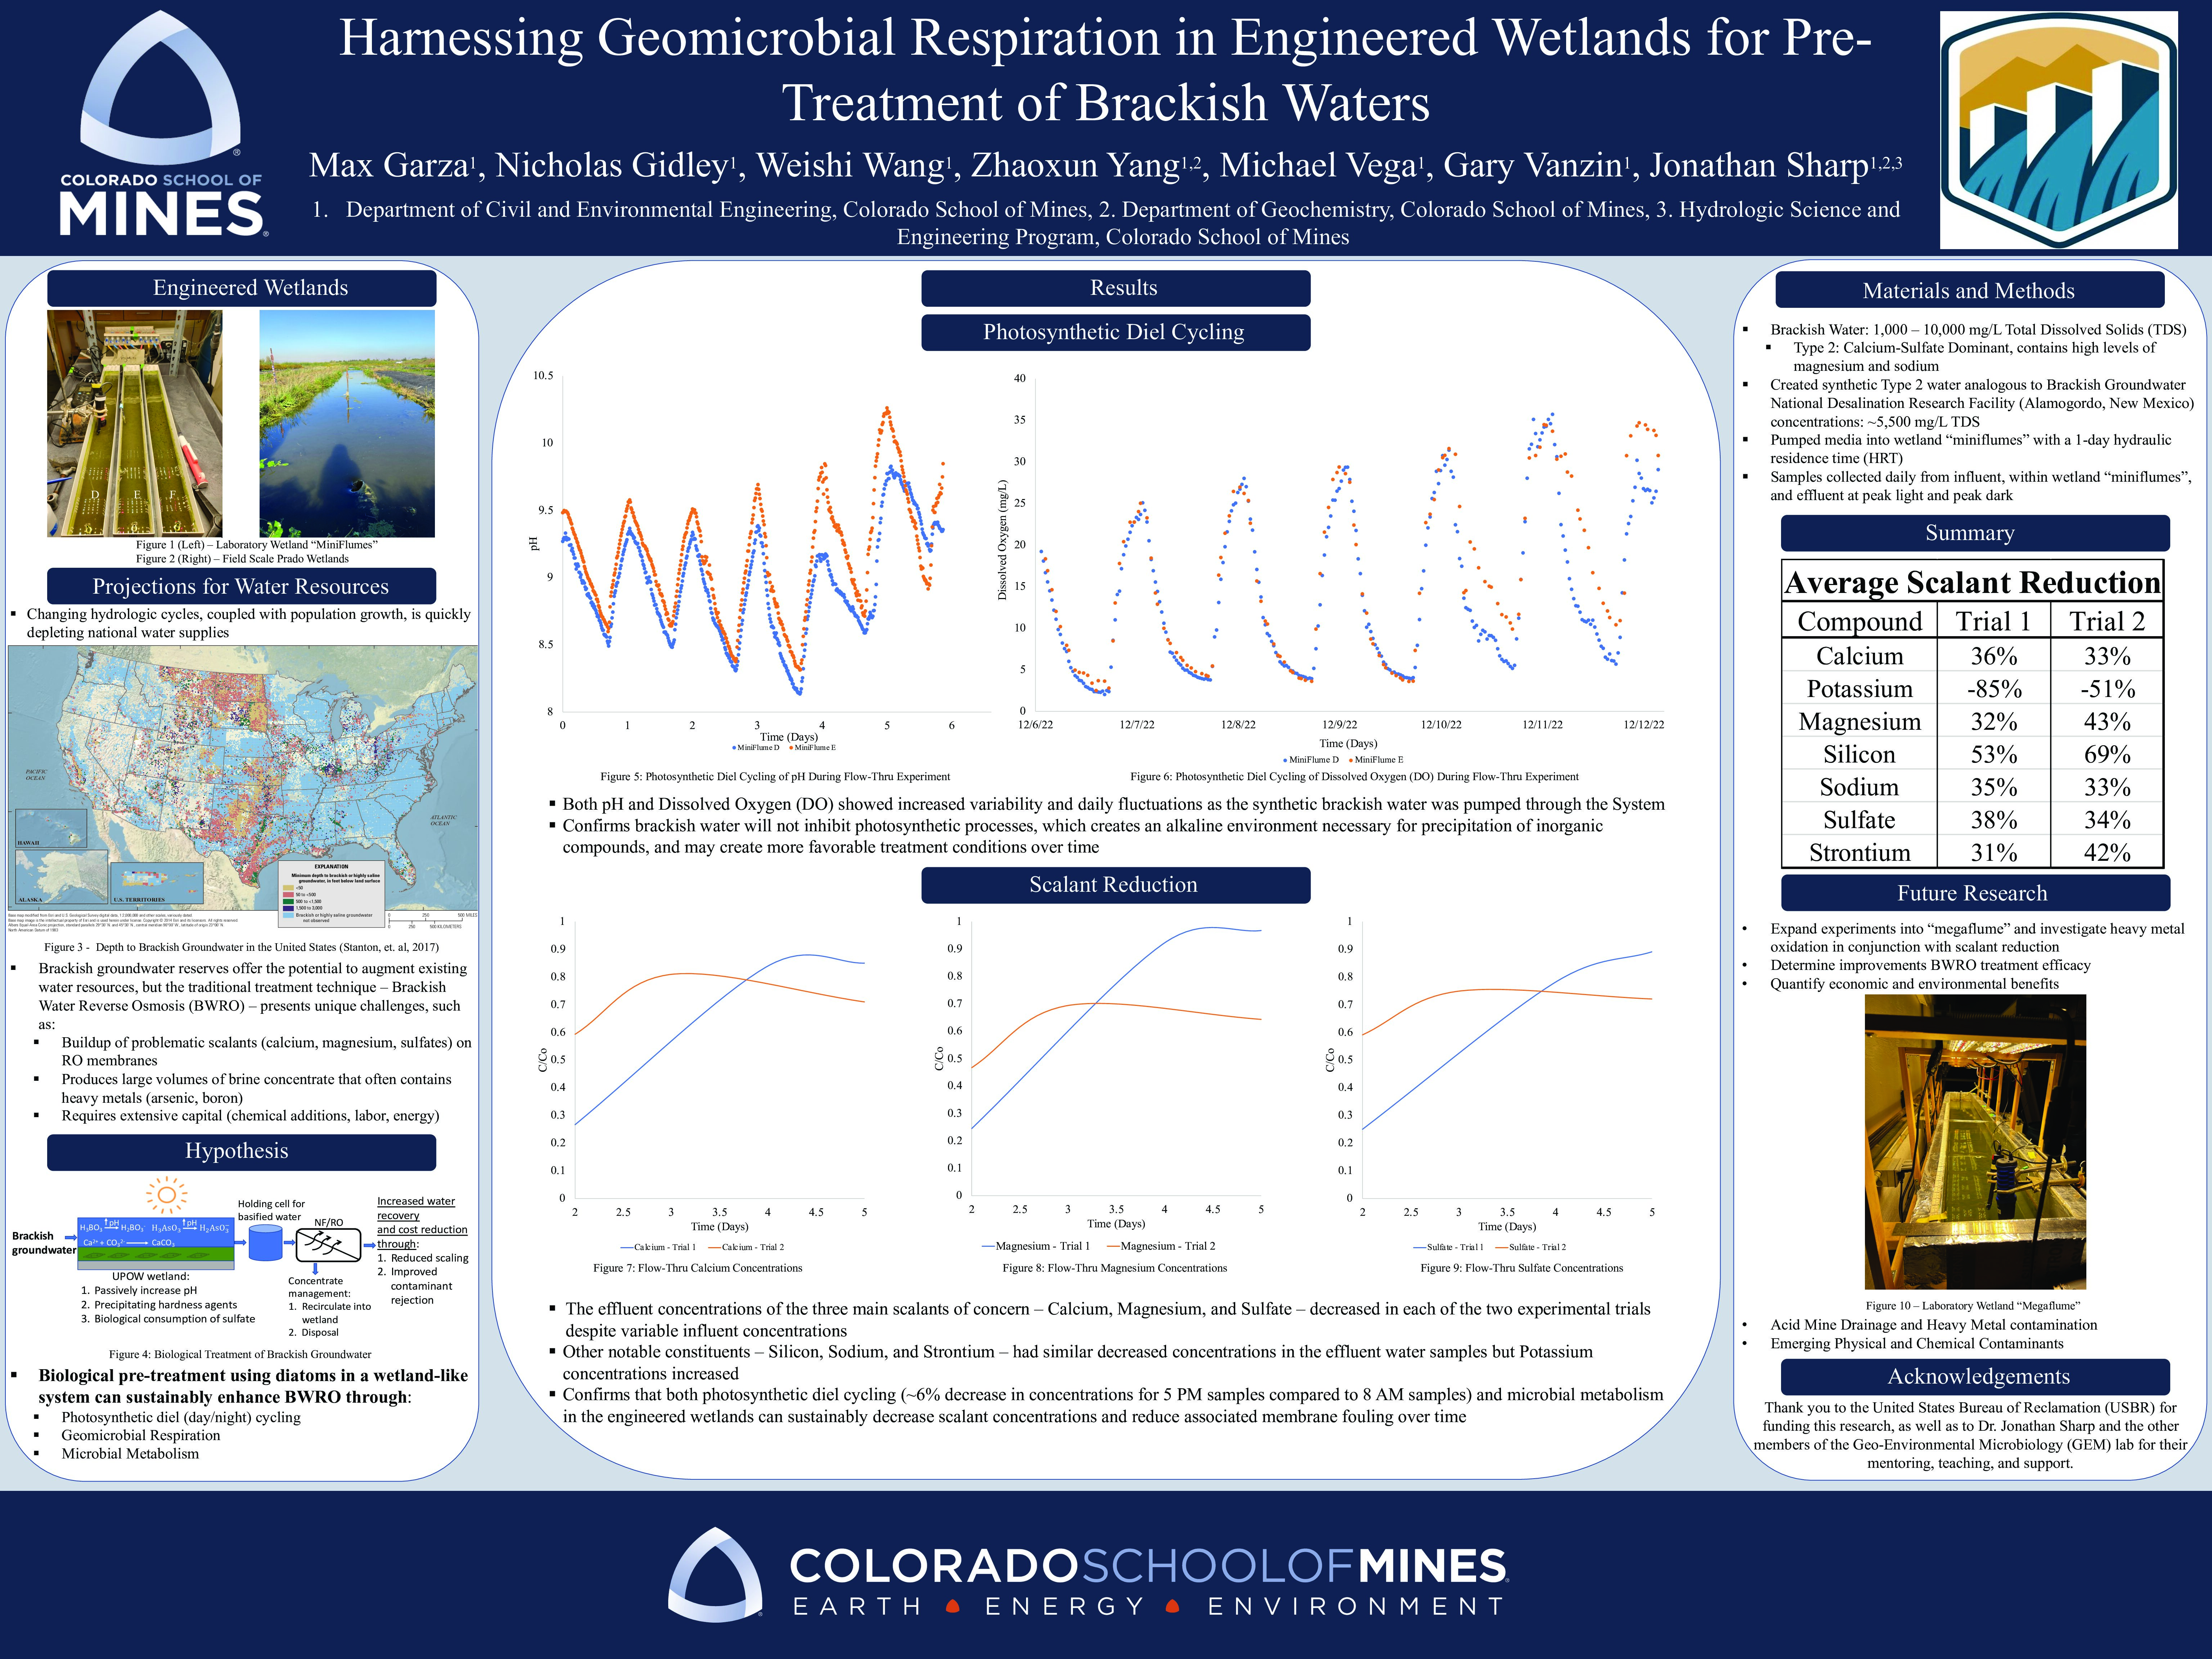 P62 Harnessing Geomicrobial Respiration in Engineered Wetlands for Pre-Treatment of Brackish Waters